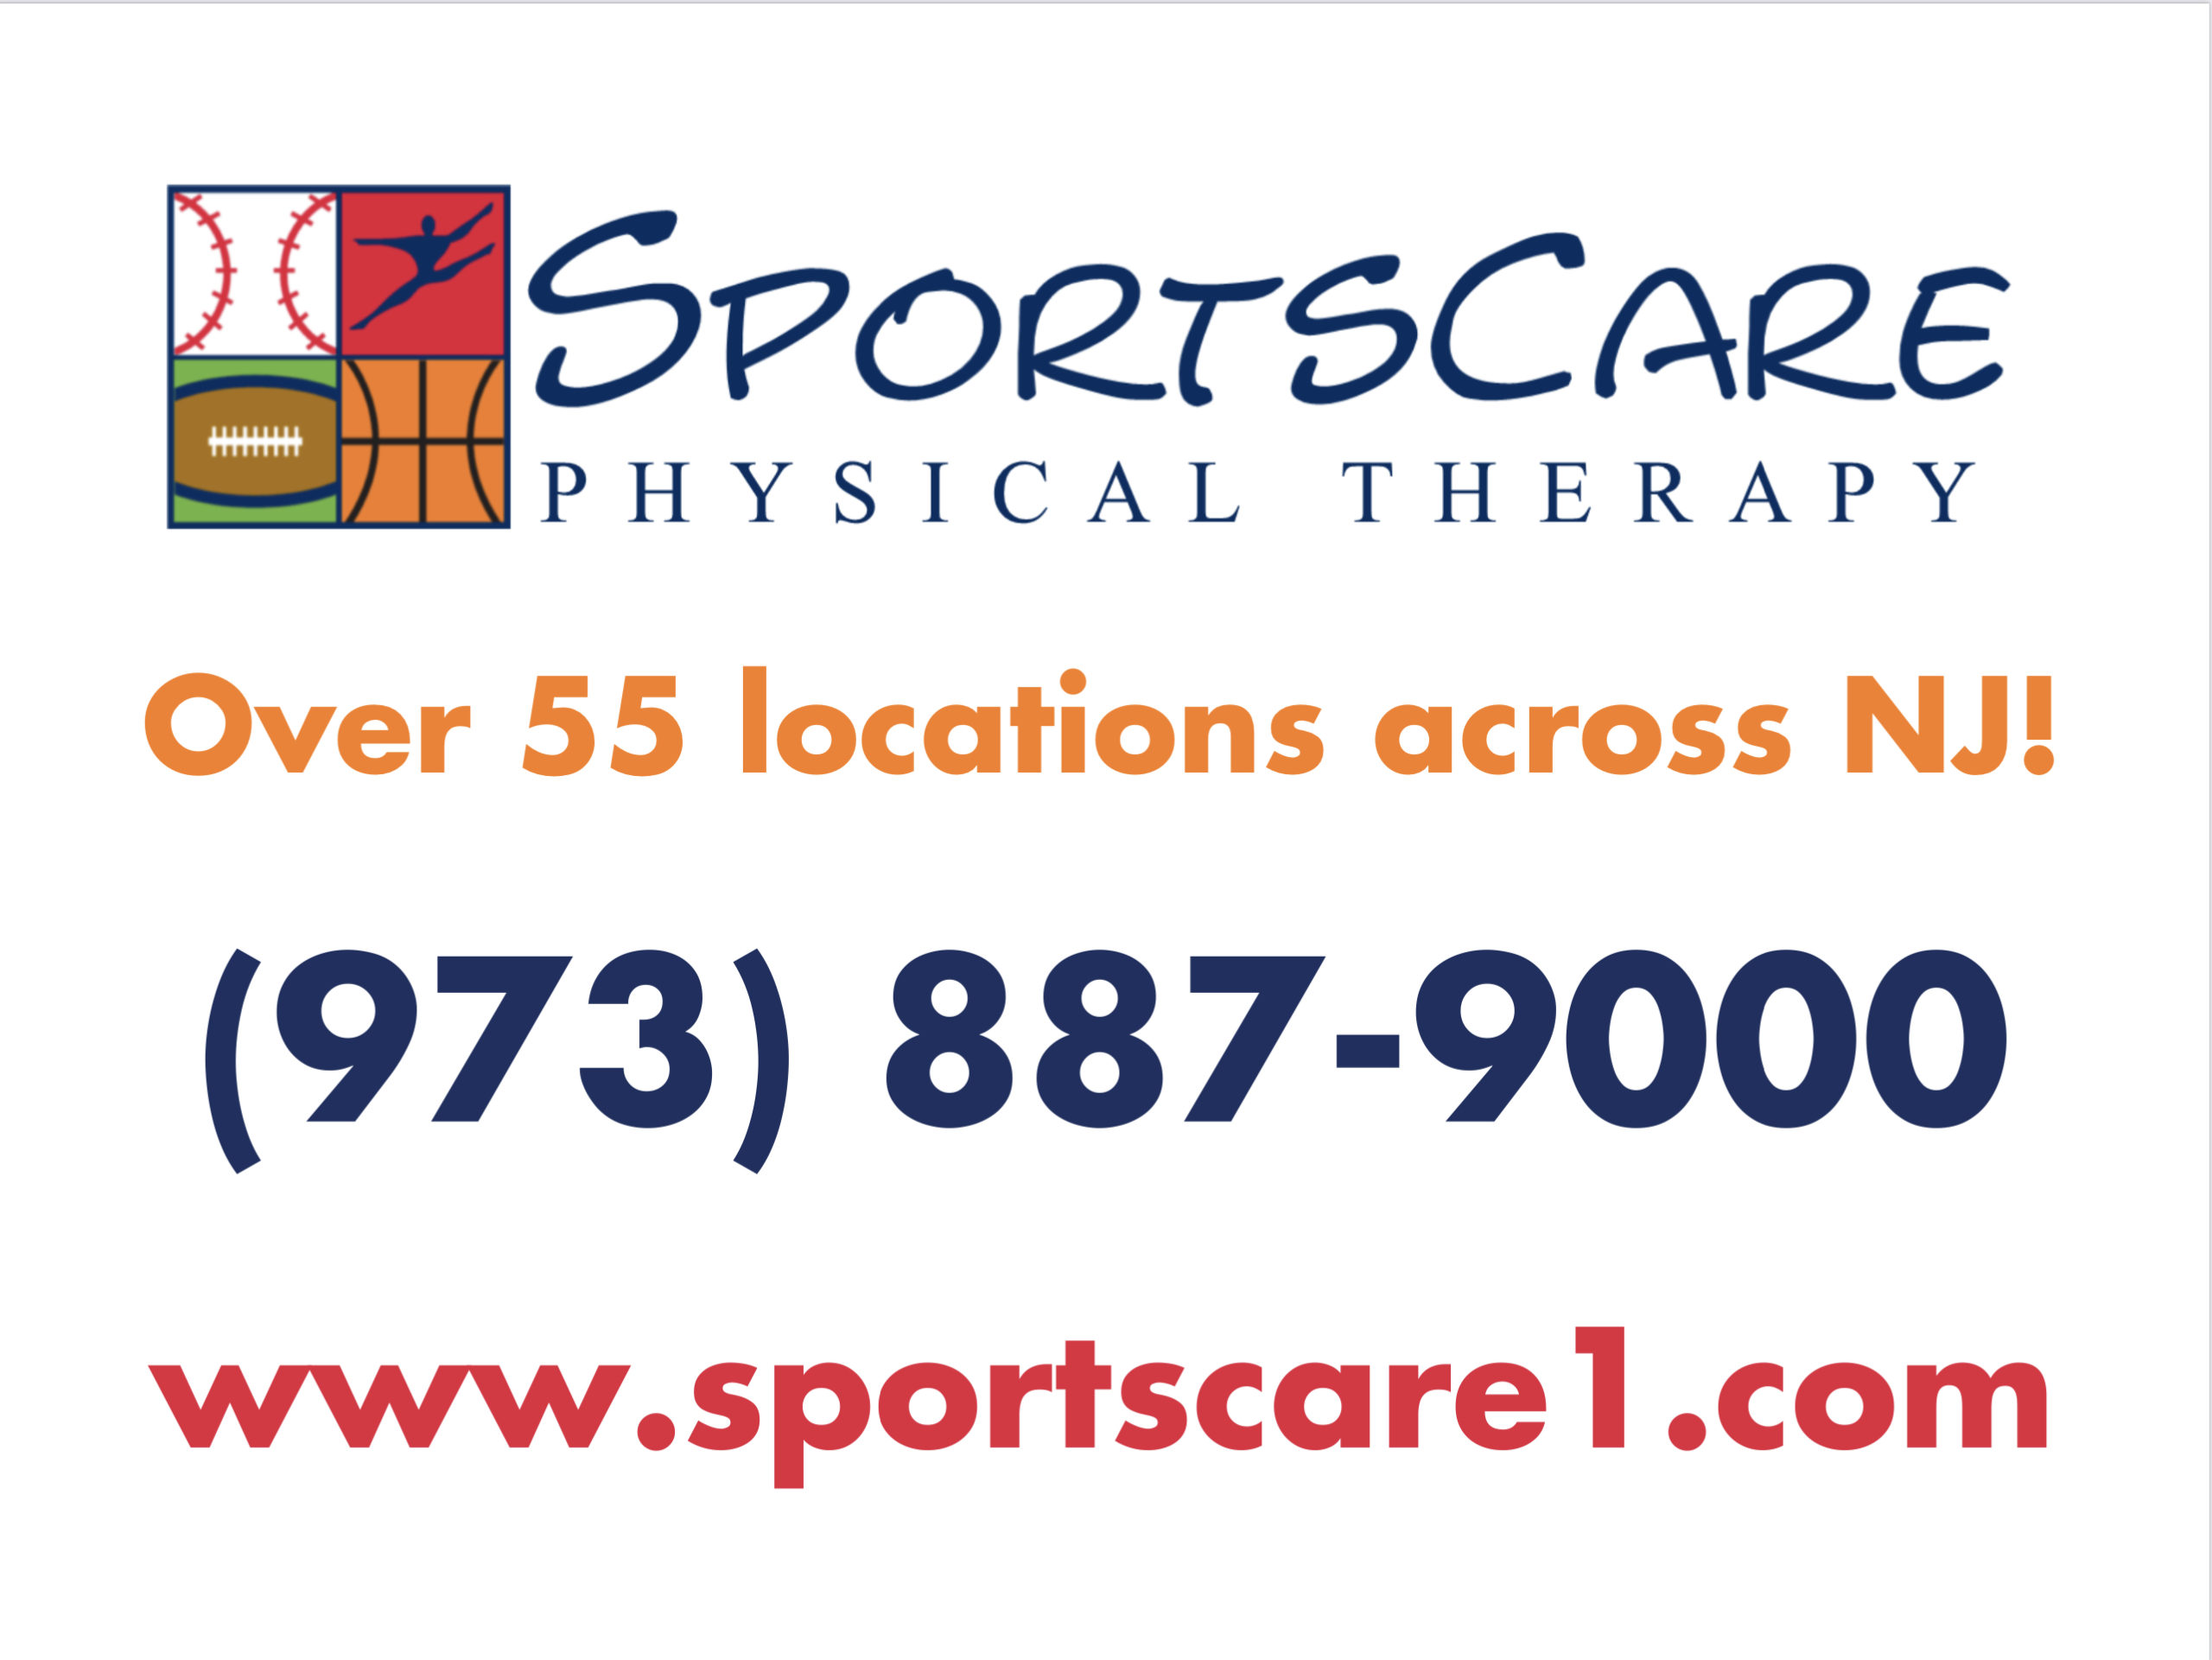 We’re not just SPORTS, we’re all about the CARE! 973-887-9000